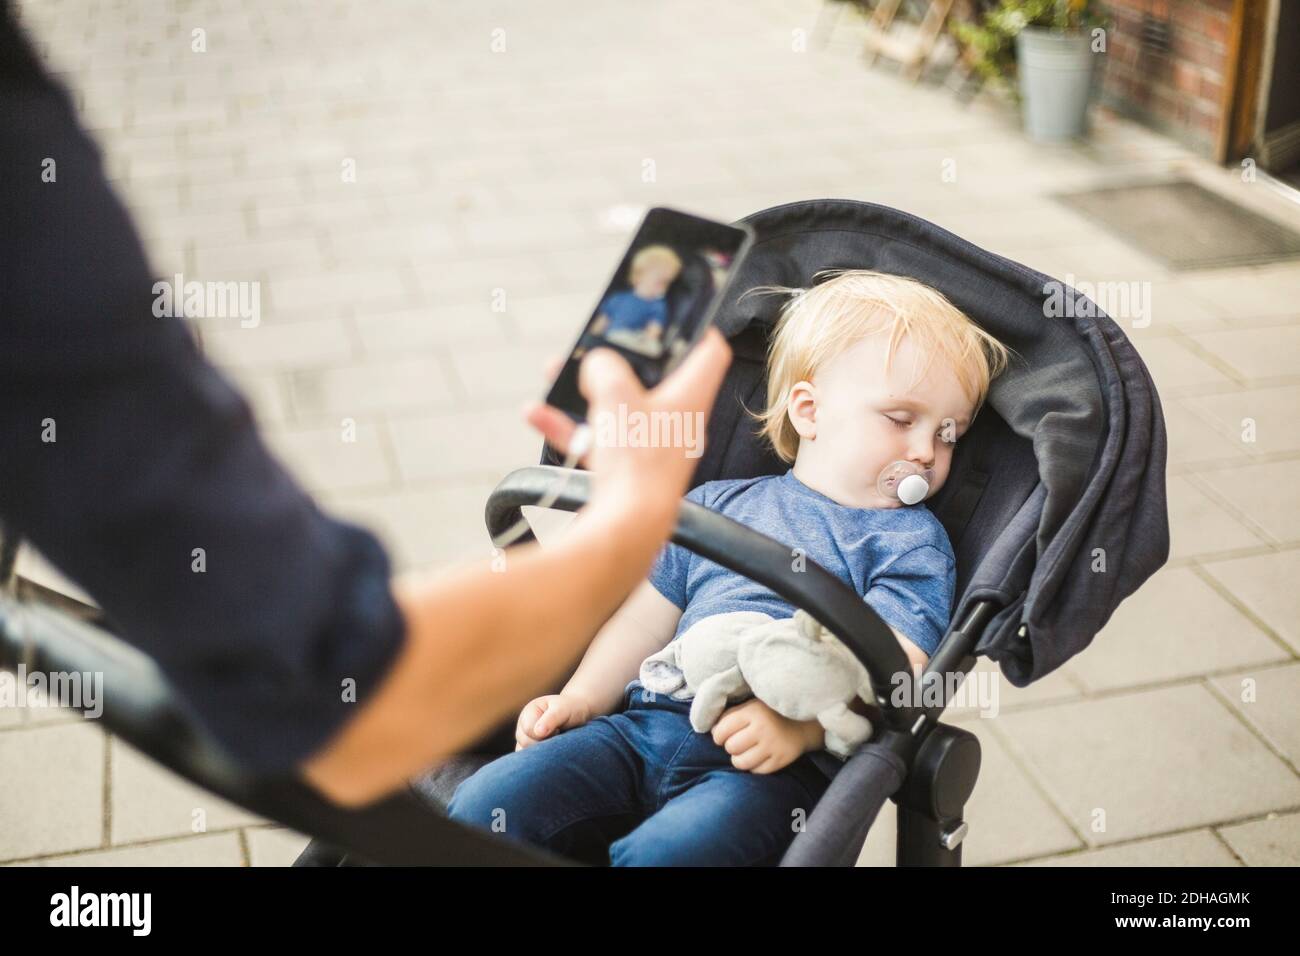 Hand of father photographing sleeping son on baby stroller in city Stock Photo